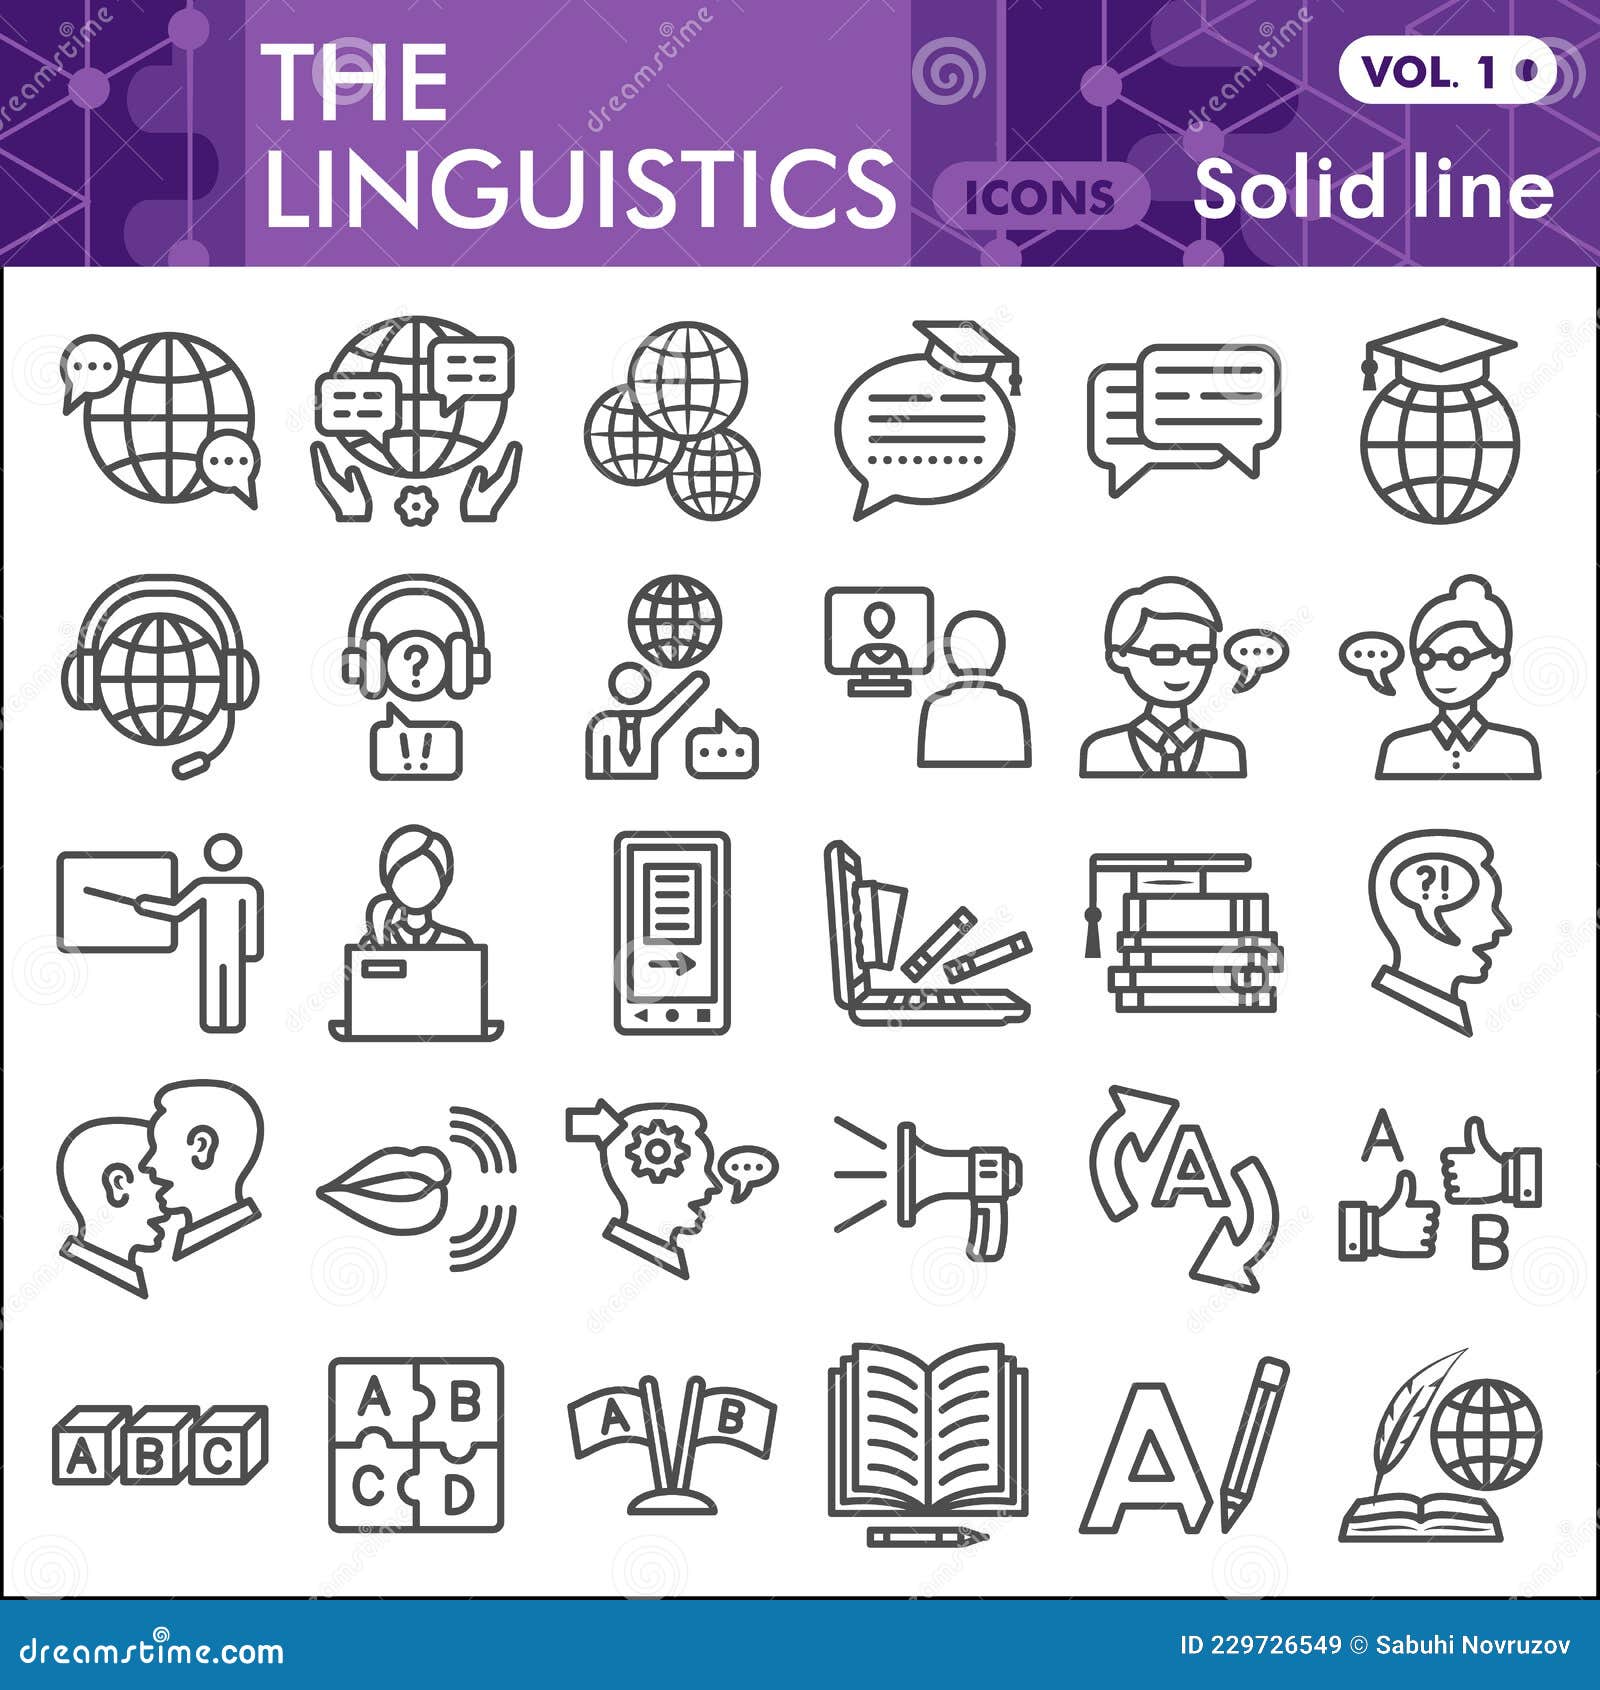 linguistics line icon set, education s collection or sketches. foreign language solid line linear style signs for